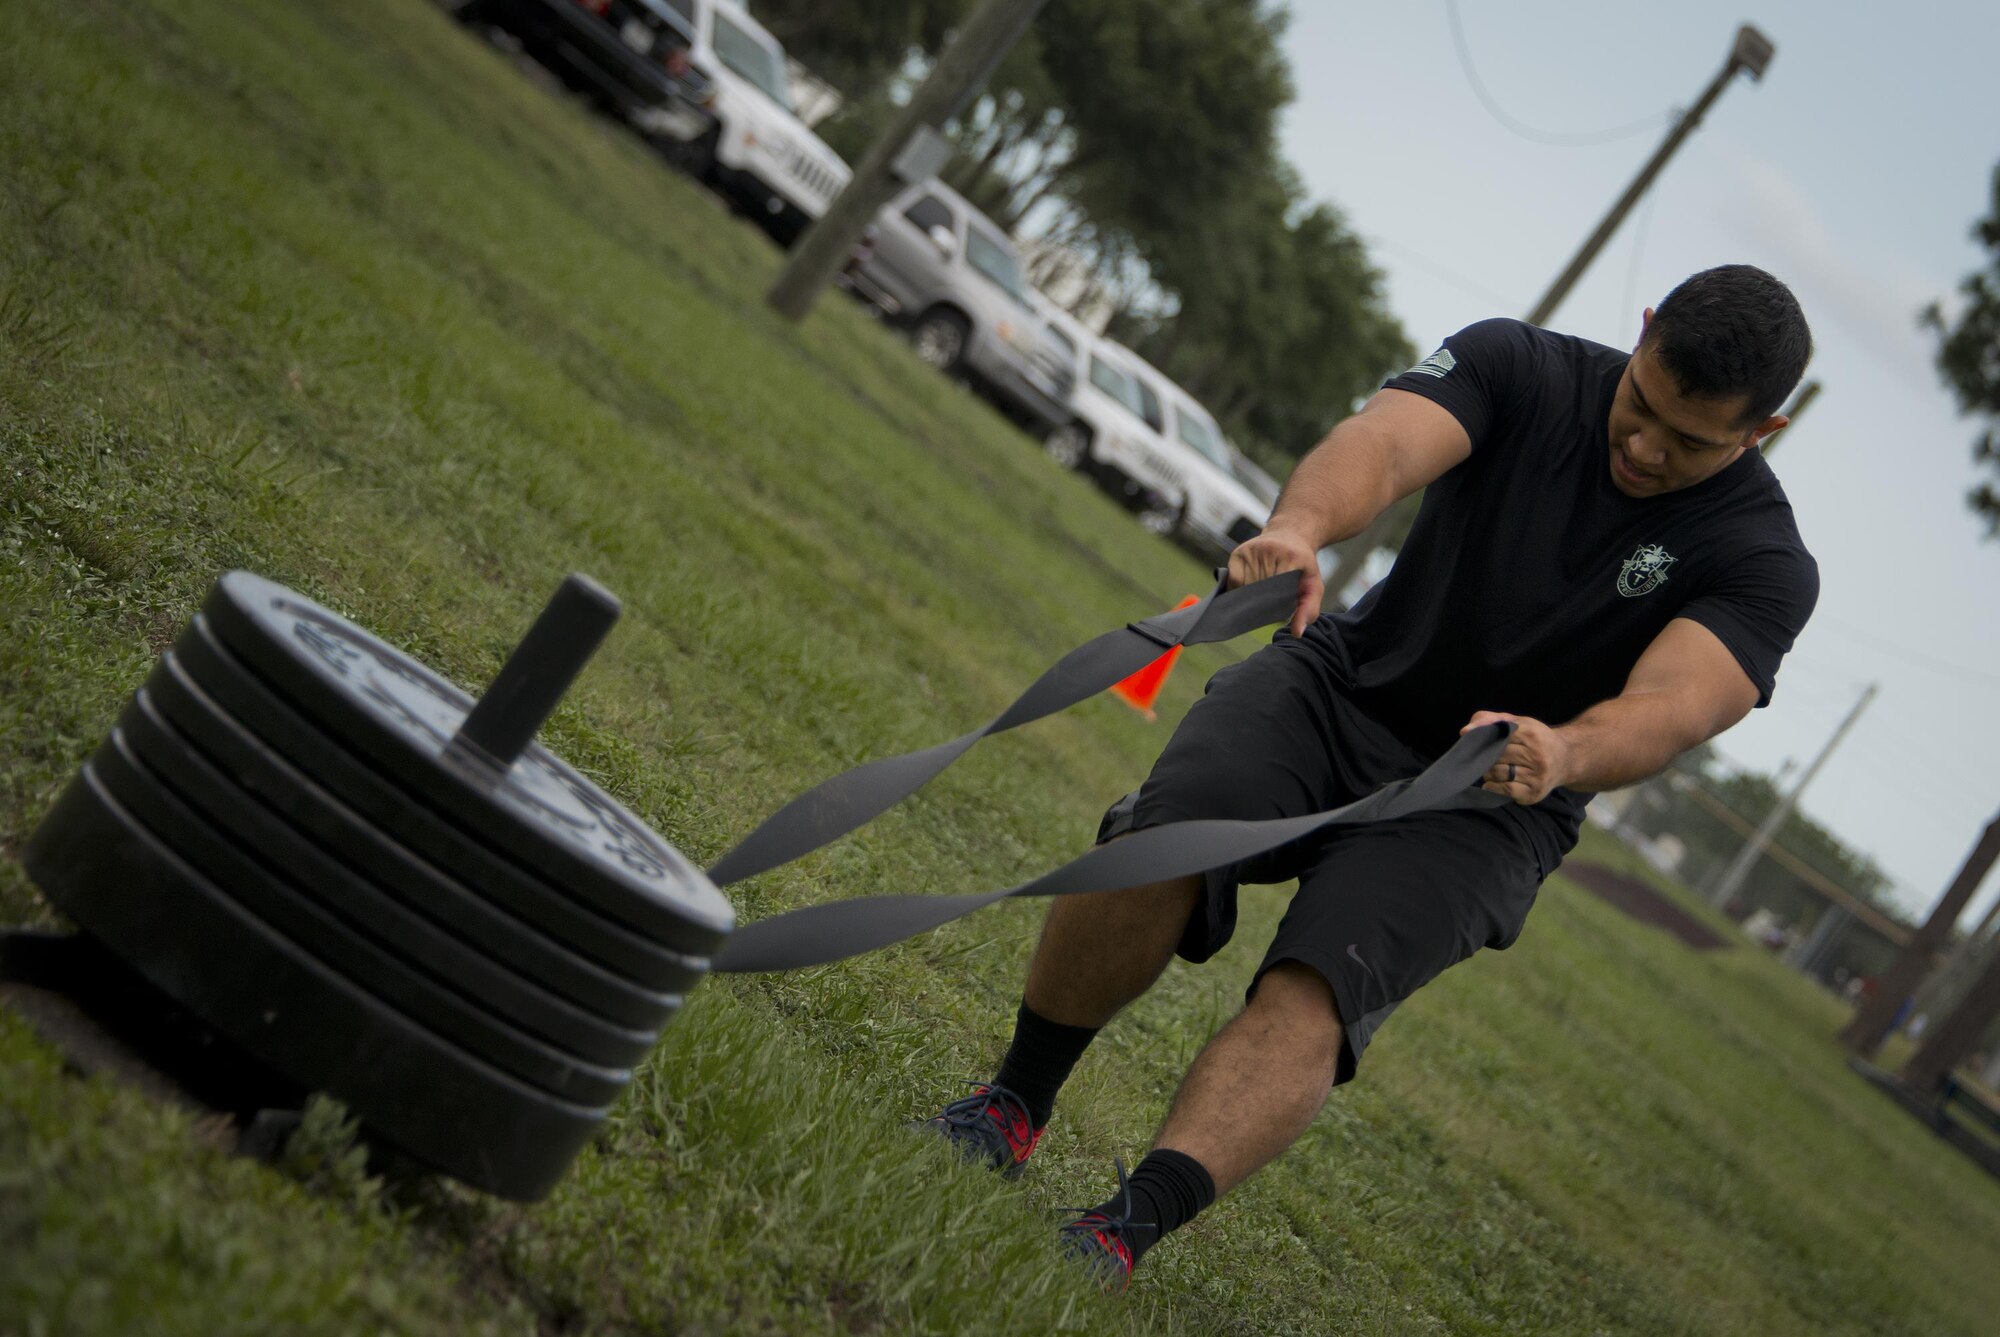 Spc. Jose Castillo, 7th Special Forces Group, pulls a weighted sled toward the finish line during a team combat fit competition June 11 at Duke Field, Fla.  The three-round competition pushed the teams to their limits with repetitive weight lifting, rowing, sled-pulling and other kinetic activities.  (U.S. Air Force photo/Tech. Sgt. Sam King)